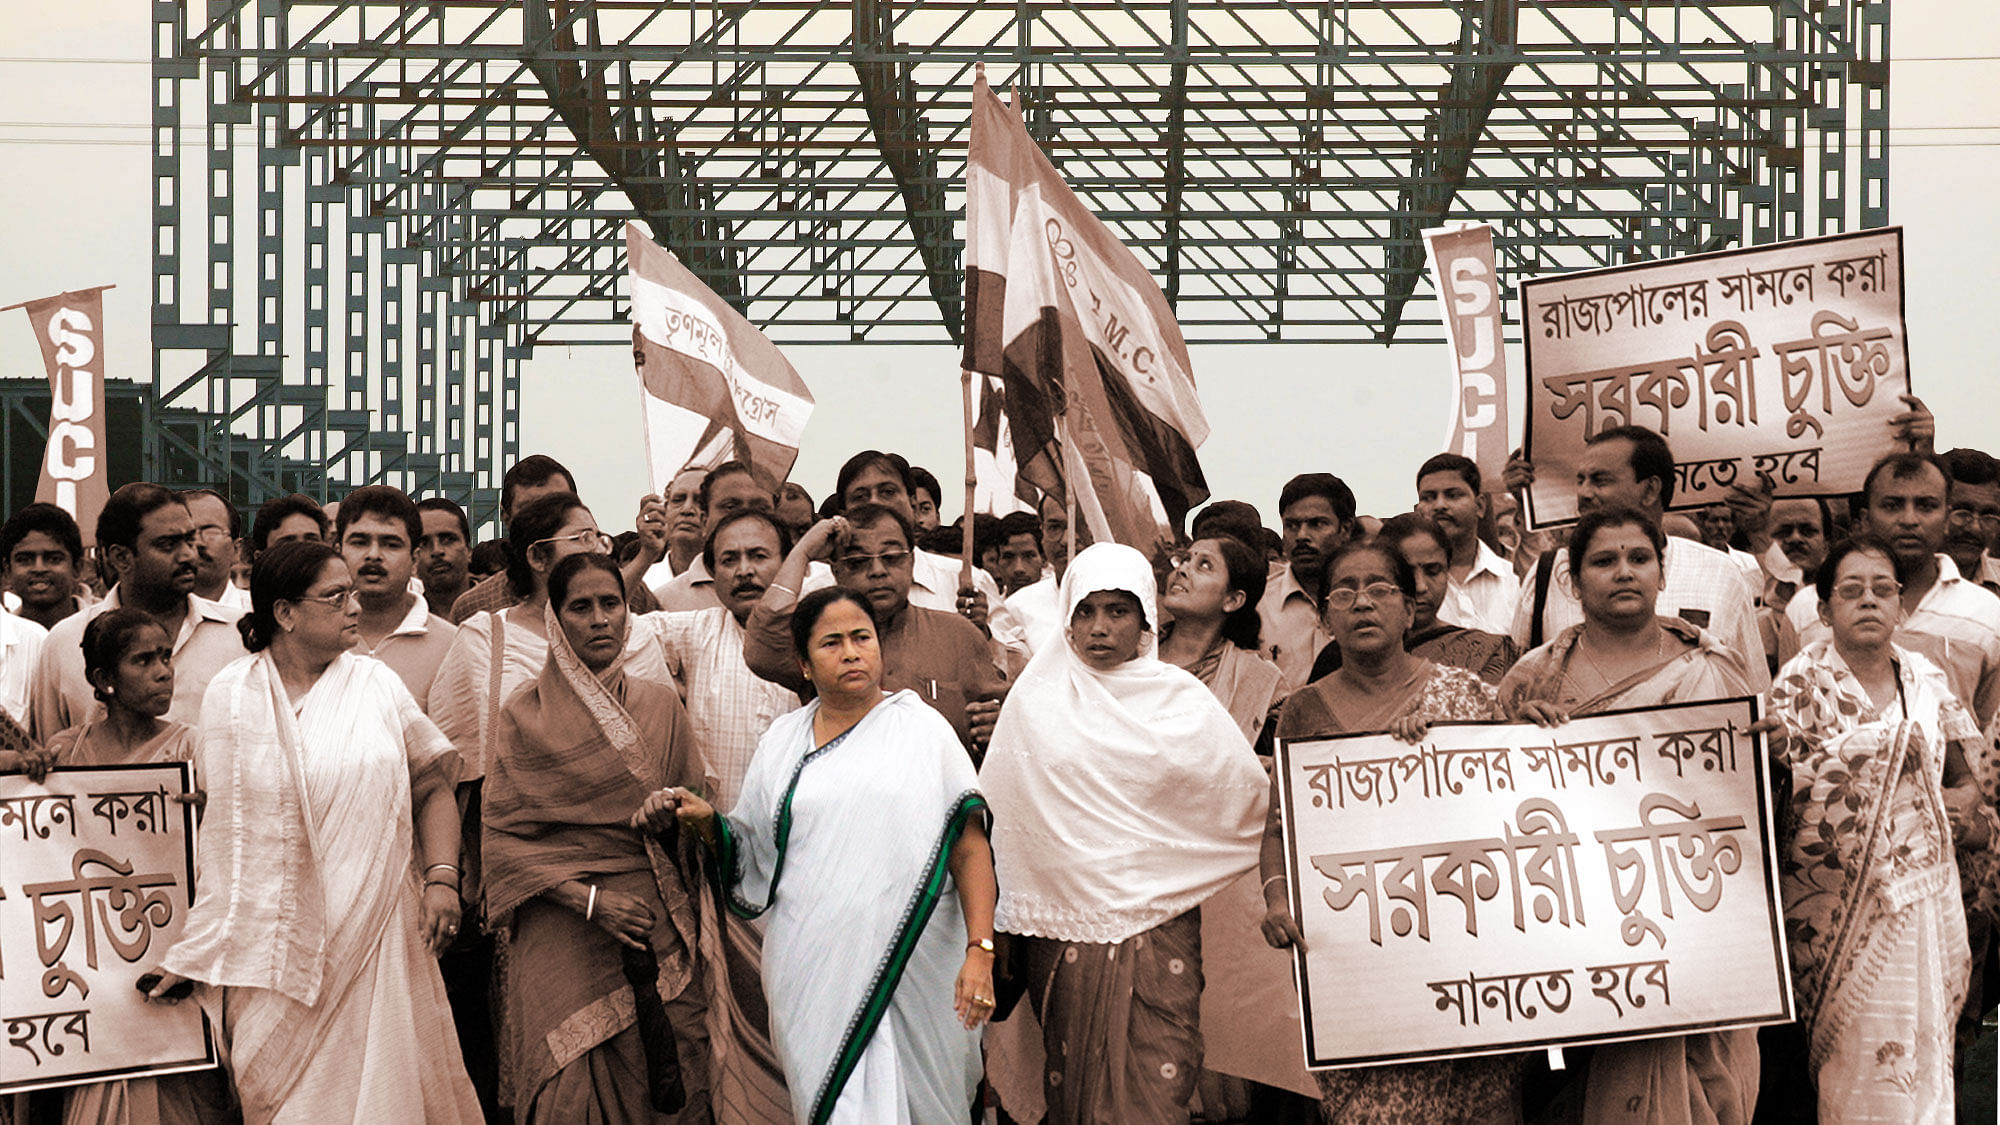 Mamata Banerjee  marches with party activists during a protest rally in front of Tata Motors’ small car project in Singur, 26 September 2008.(Photo: Reuters/ Altered by <b>The Quint</b>)